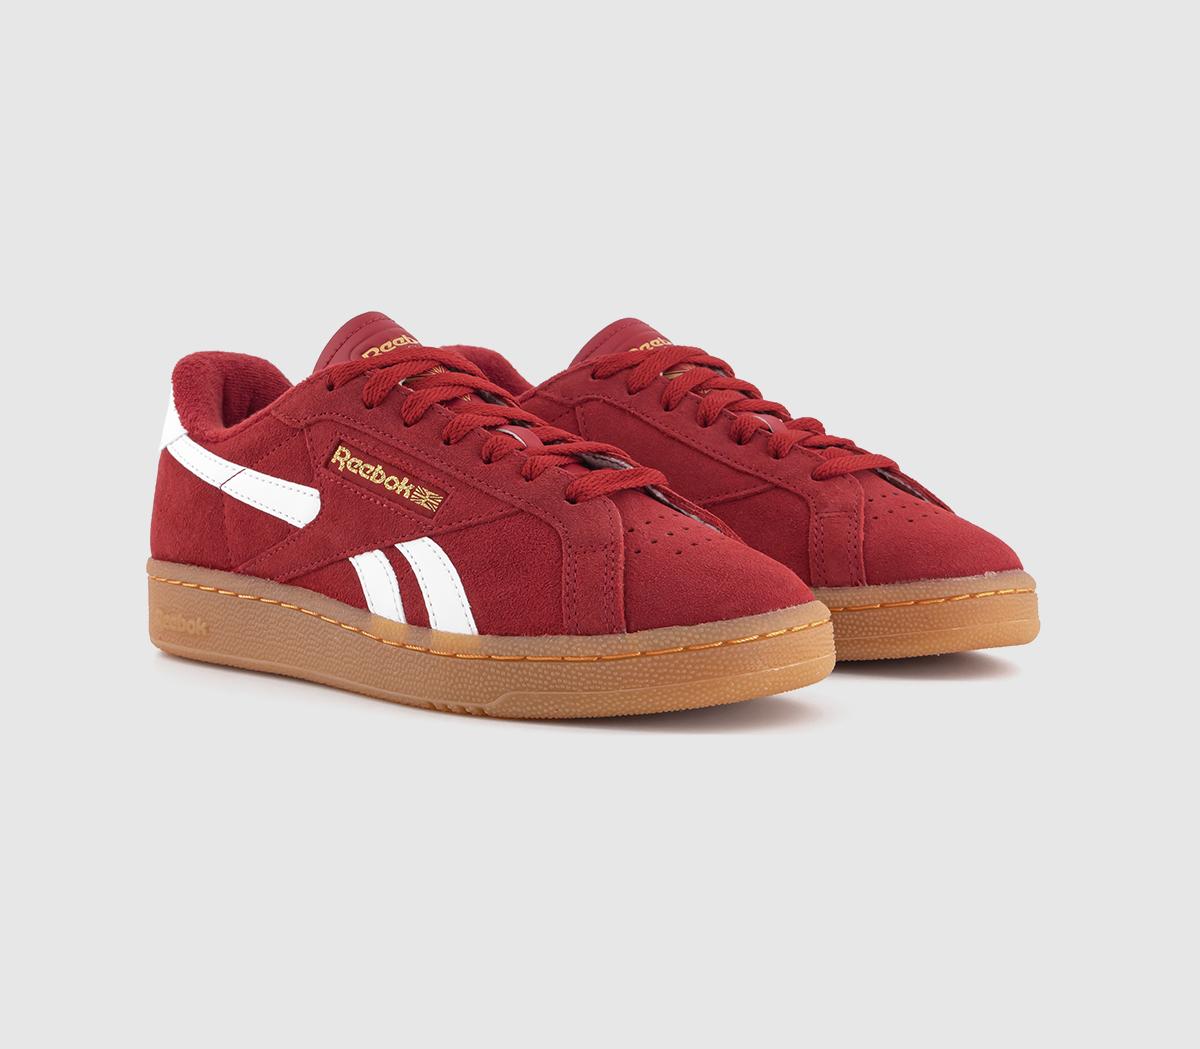 Reebok Womens Club C Grounds Trainers Flash Red Gum, 9.5